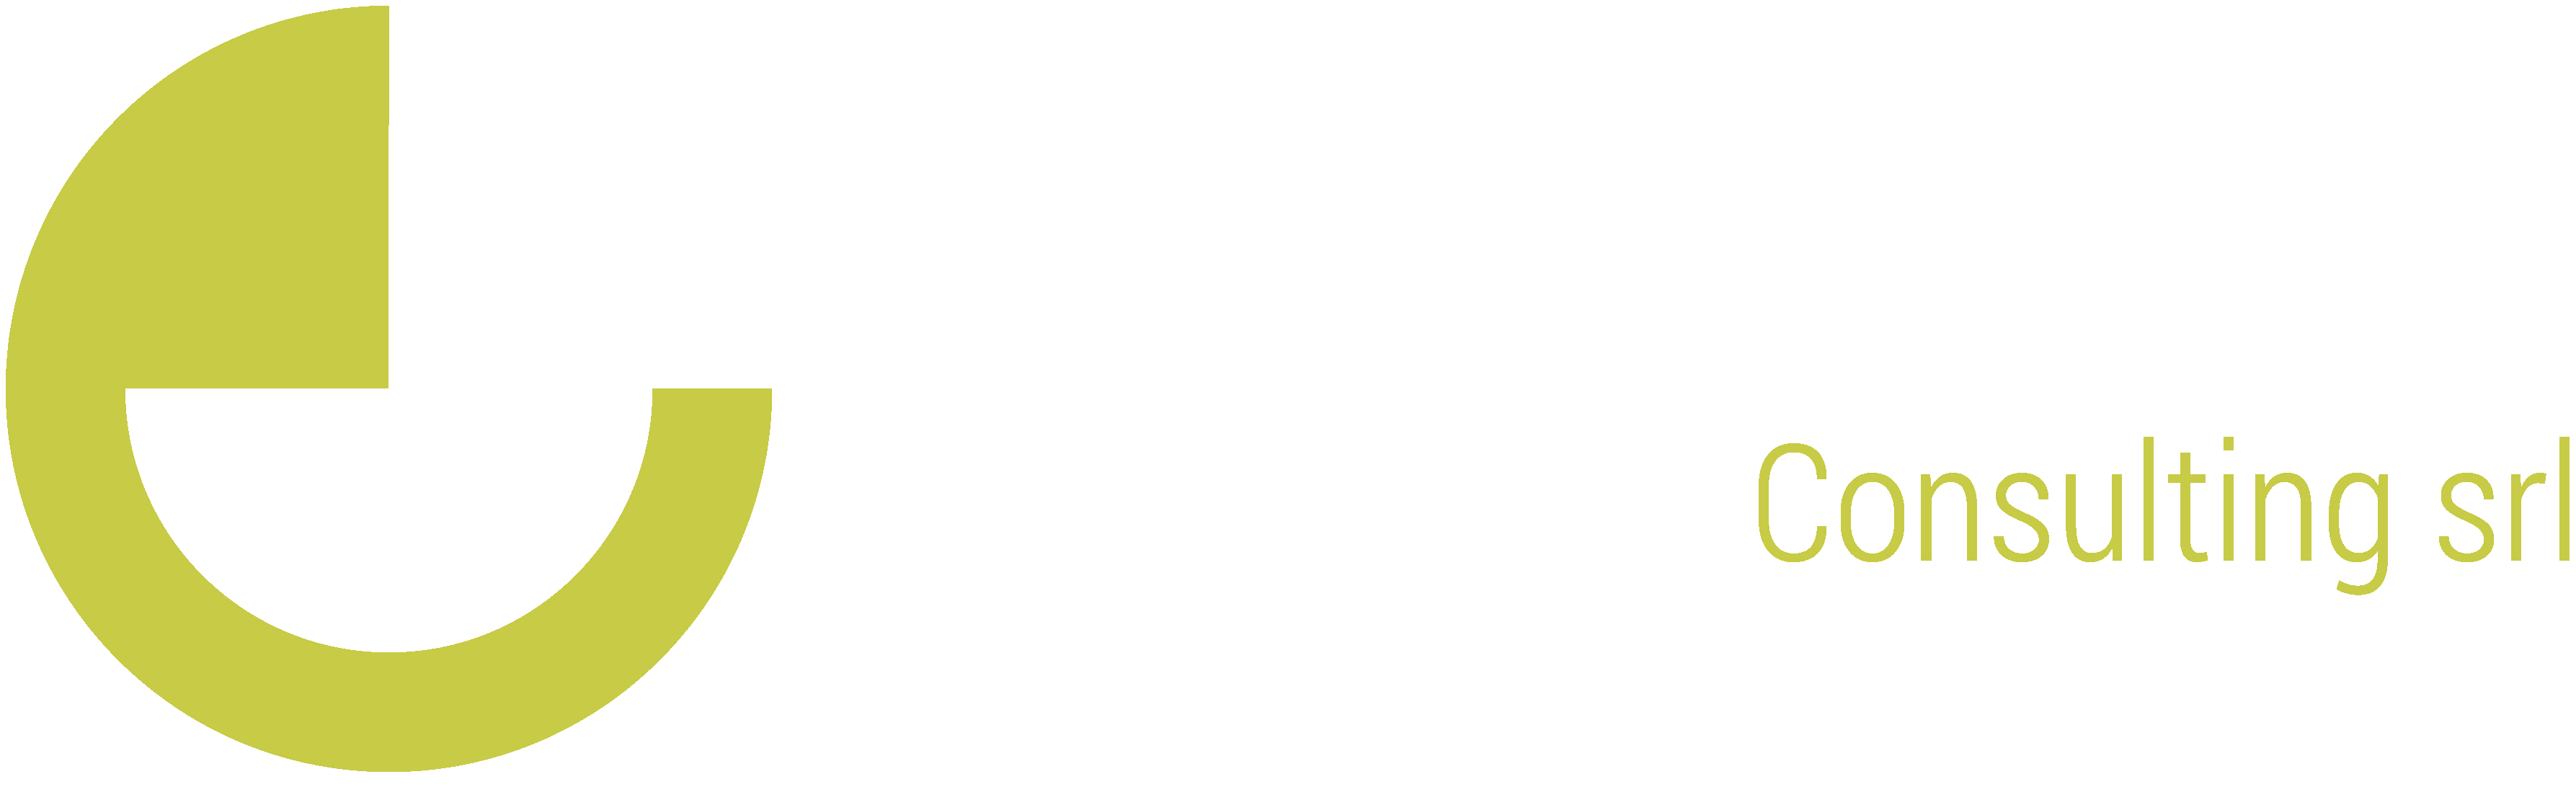 CD Finance Consulting srl